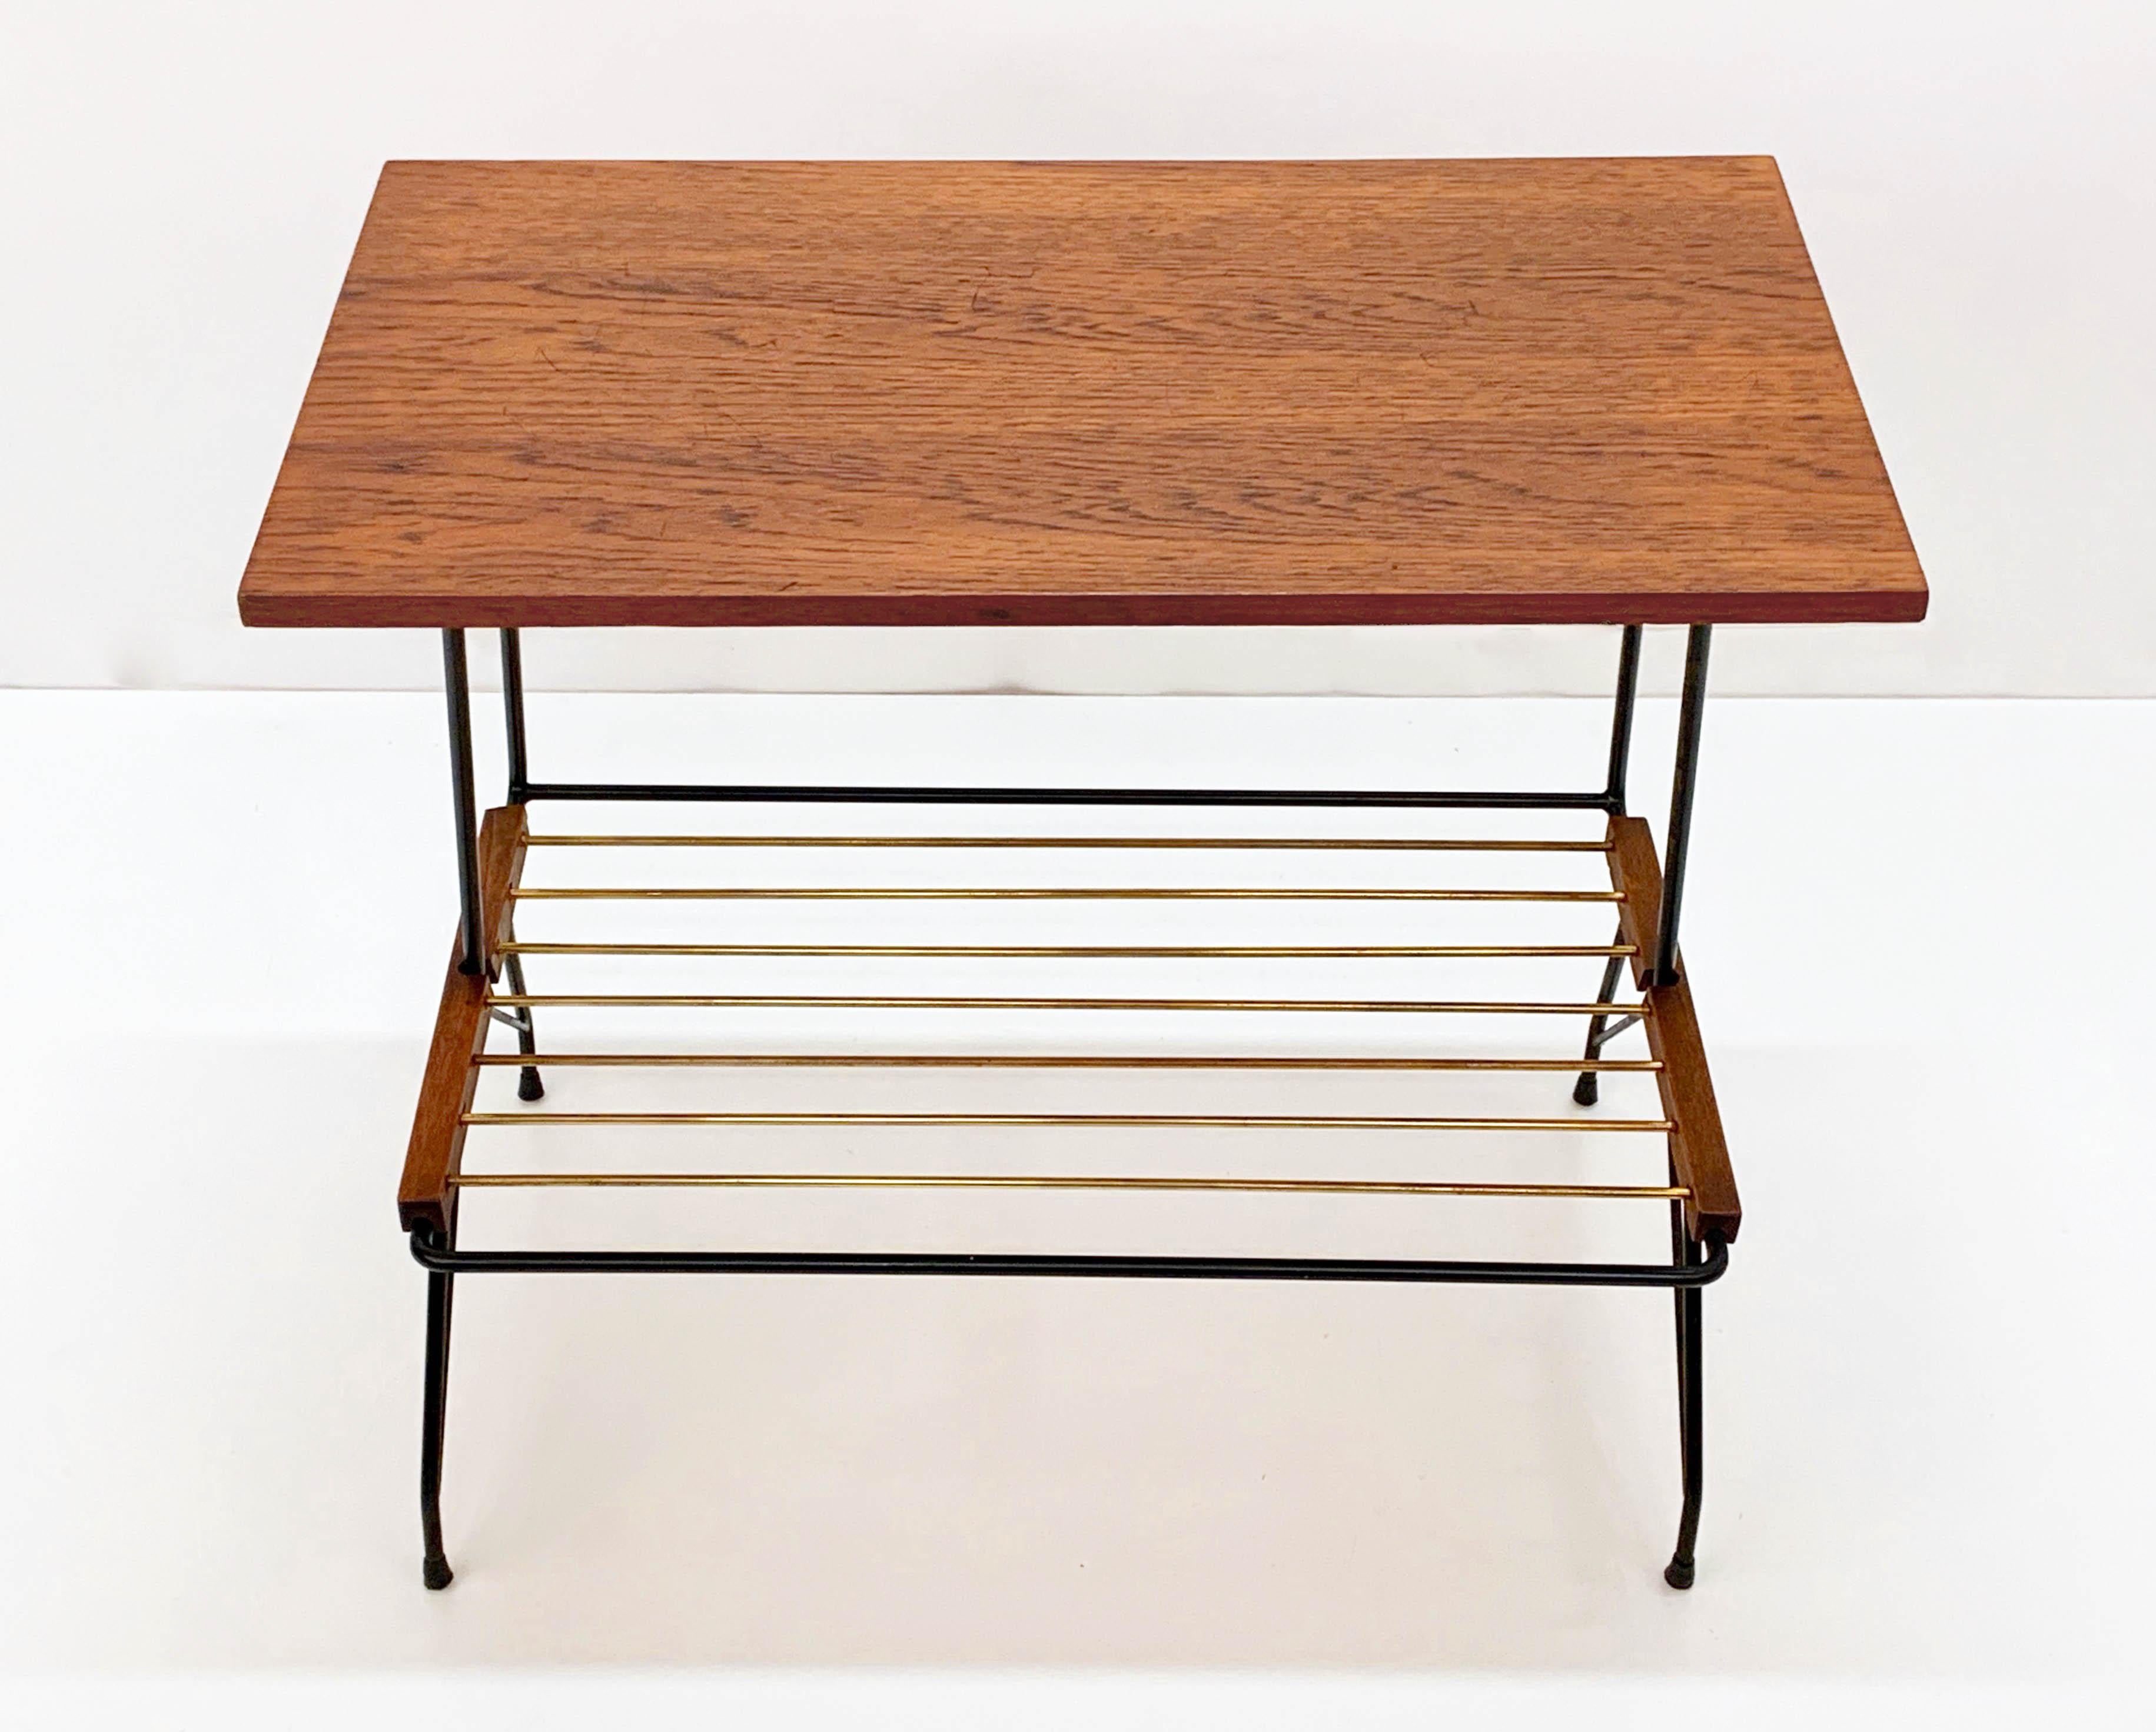 Wonderful midcentury coffee wooden, brass and black metal coffee table. This console table was produced in Italy during the 1950s and produced by Mobili Pizzetti Roma.

It is a rare and elegant wood and black metal end table with a brass magazine